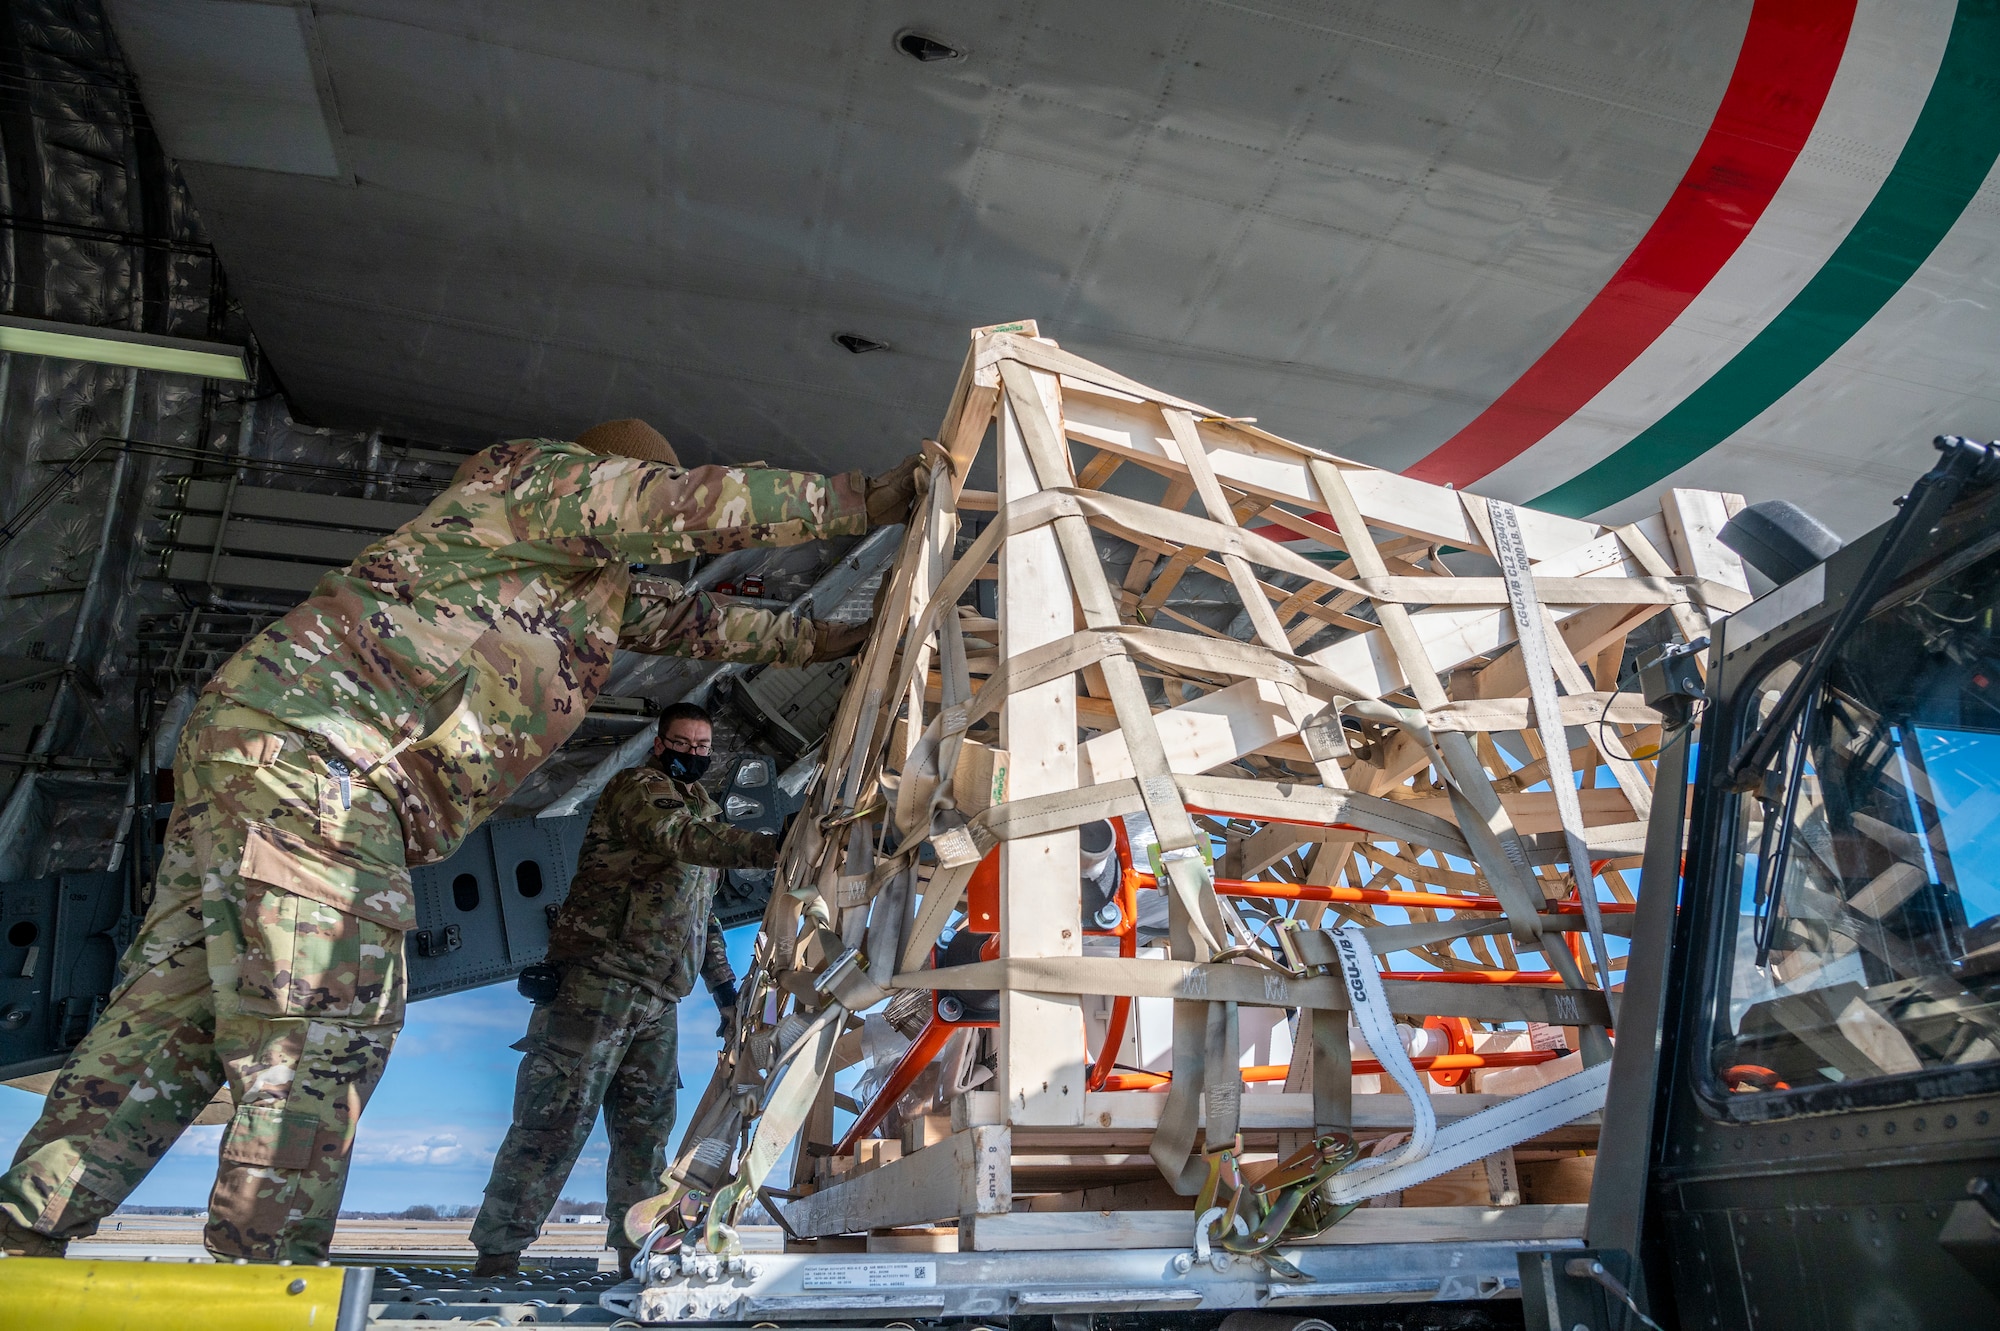 Airmen from the 436th Aerial Port Squadron unload cargo from a Kuwait air force C-17 Globemaster III at Dover Air Force Base, Delaware, Jan. 22, 2021. The U.S. strongly supports Kuwait’s sovereignty, security and independence as well as its multilateral diplomatic efforts to build greater cooperation in the region. Due to its strategic geographic location, Dover AFB supports approximately $3.5 billion worth of foreign military sales operations annually. (U.S. Air Force photo by Senior Airman Christopher Quail)